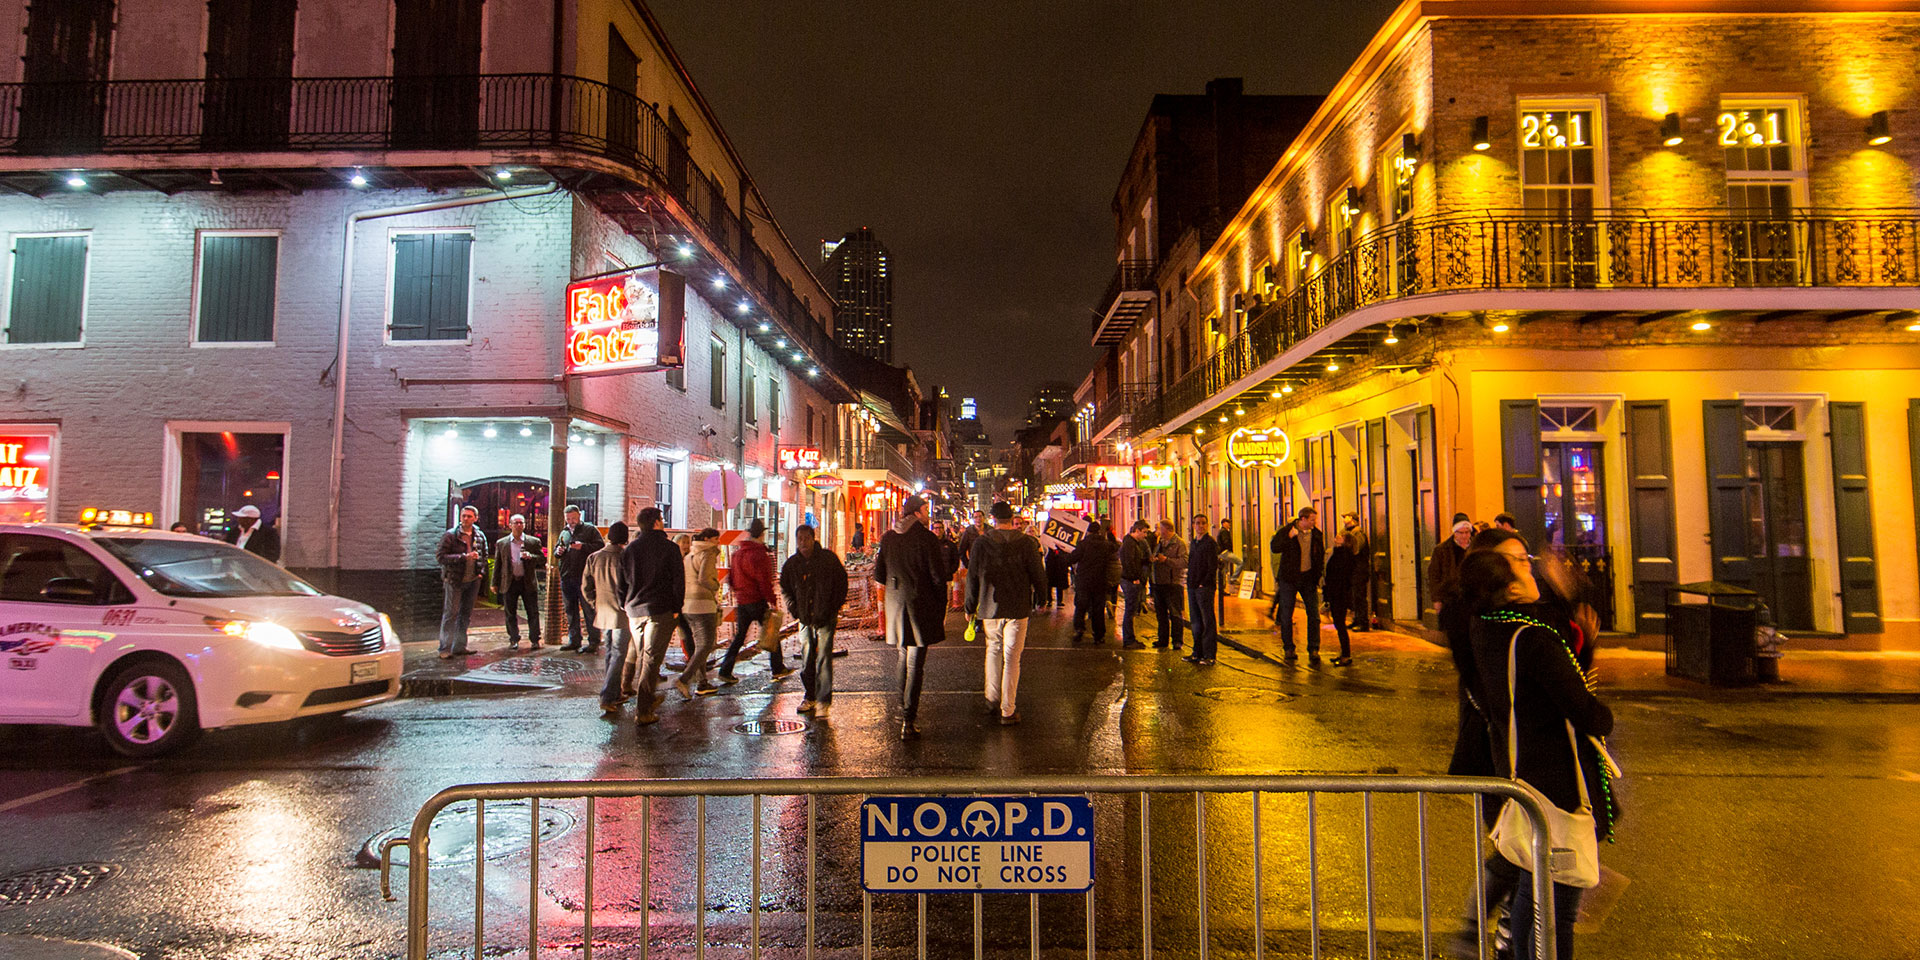 Find local favorites in New Orleans’ Bourbon Street.